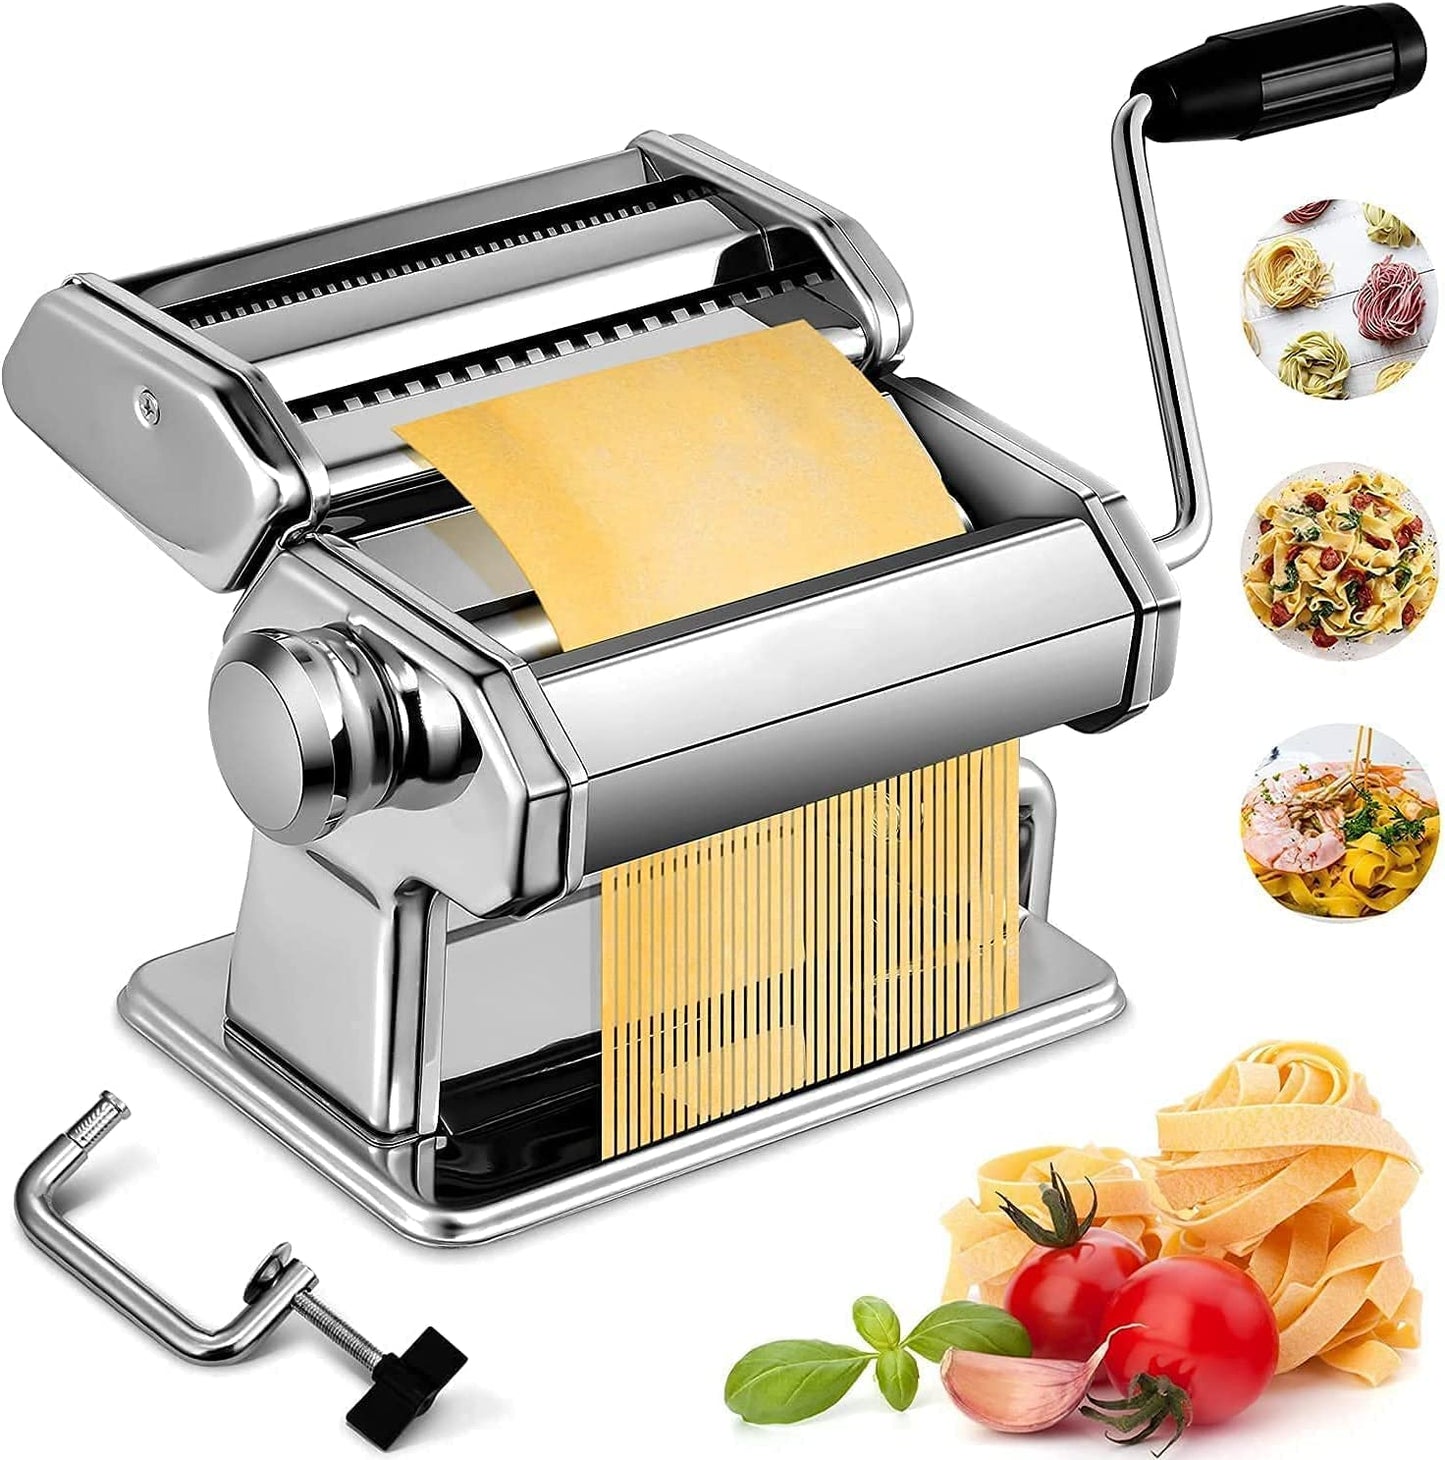 Bavne Pasta Maker Machine, 7 Thickness Settings Dough Roller Stainless Steel Pasta Maker with 2 Blades Noodle Cutter, Manual Rolling Noodles Maker Crank 2 Widths Cutter for Spaghetti Fettuccine Lasagna